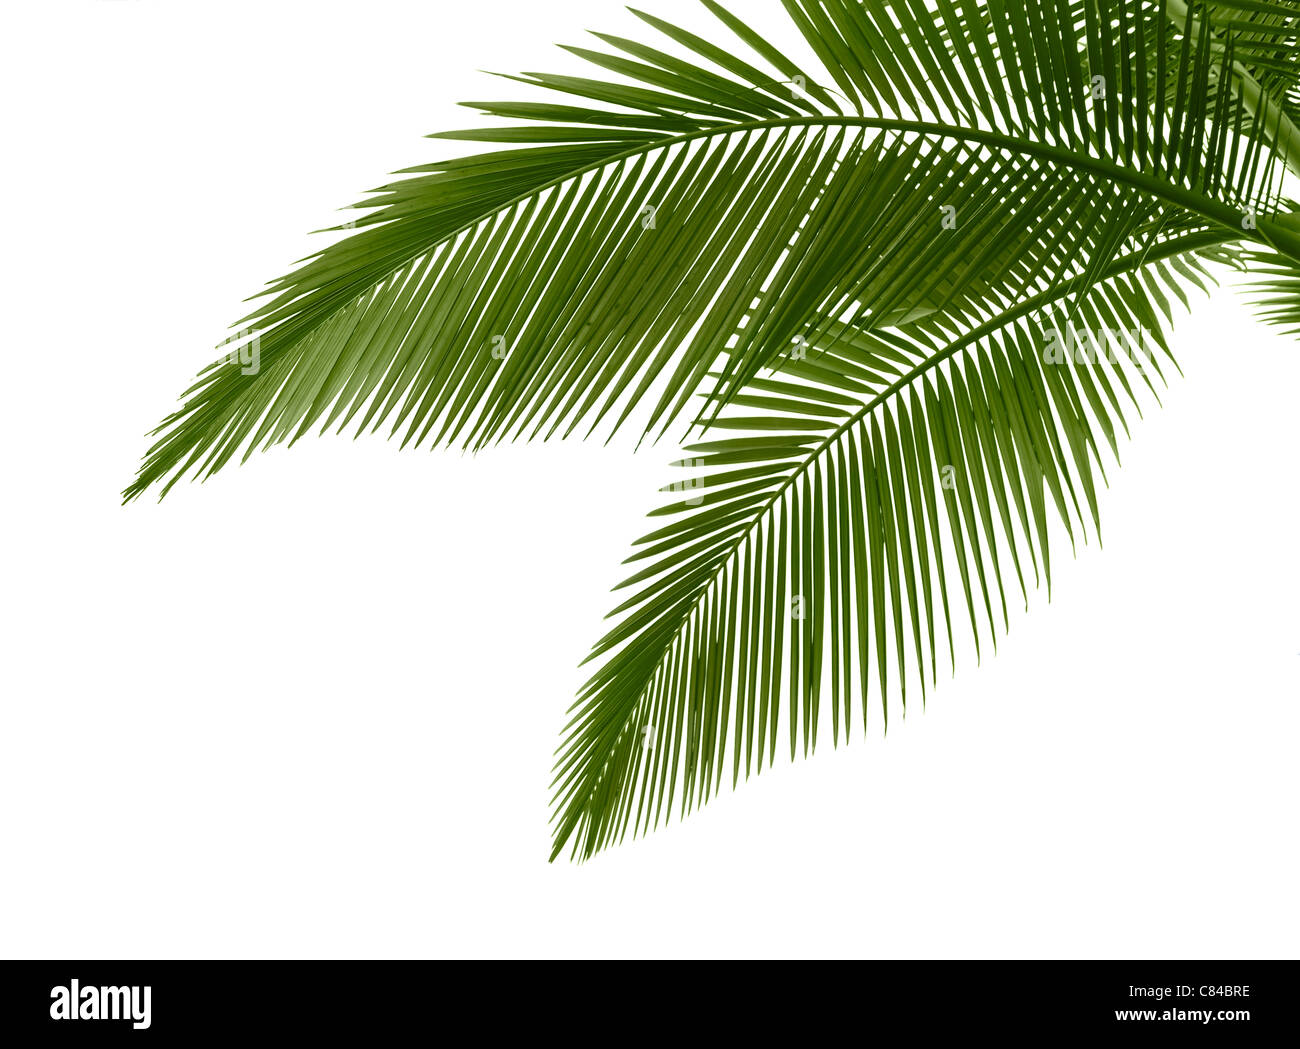 Leaves of palm tree isolated on white background Stock Photo